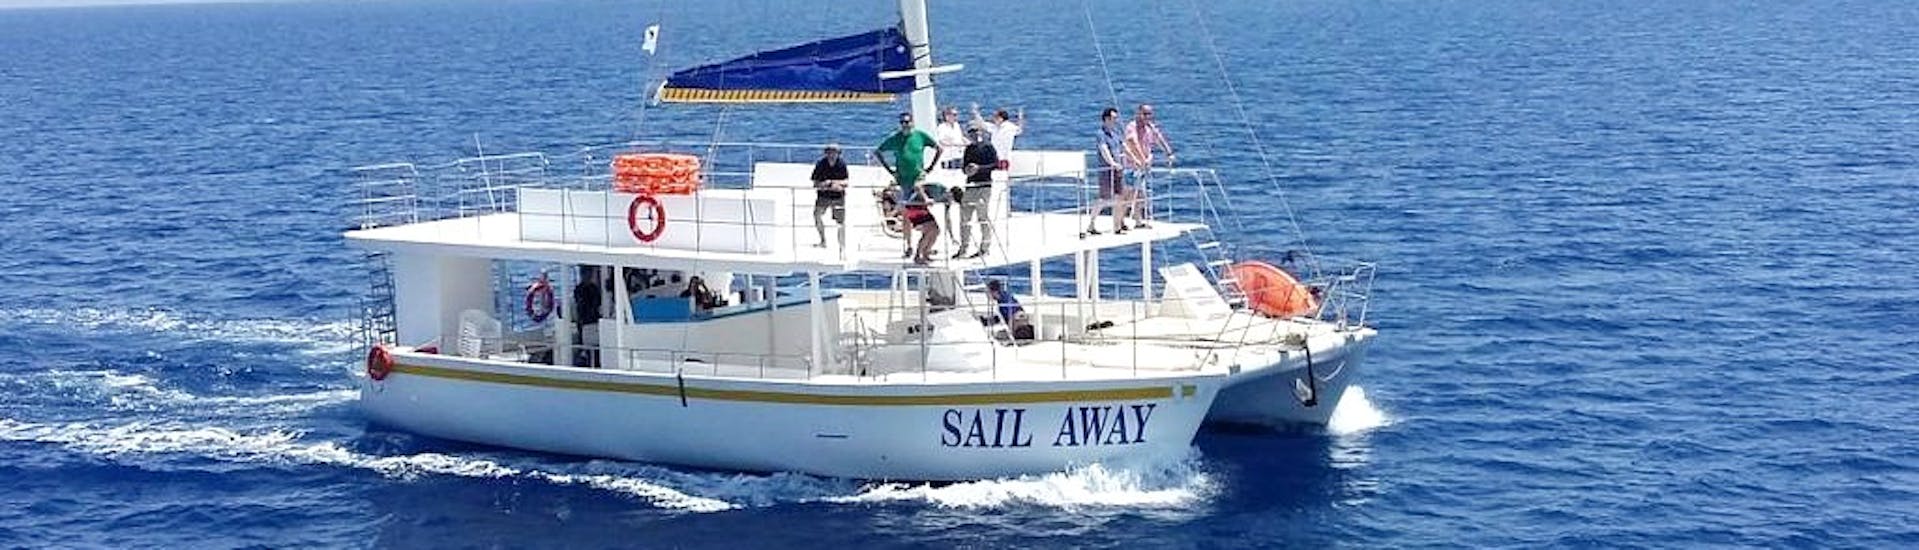 Picture of the Sail Away catamaran used by Relax-Cruises Limassol for the boat trips.